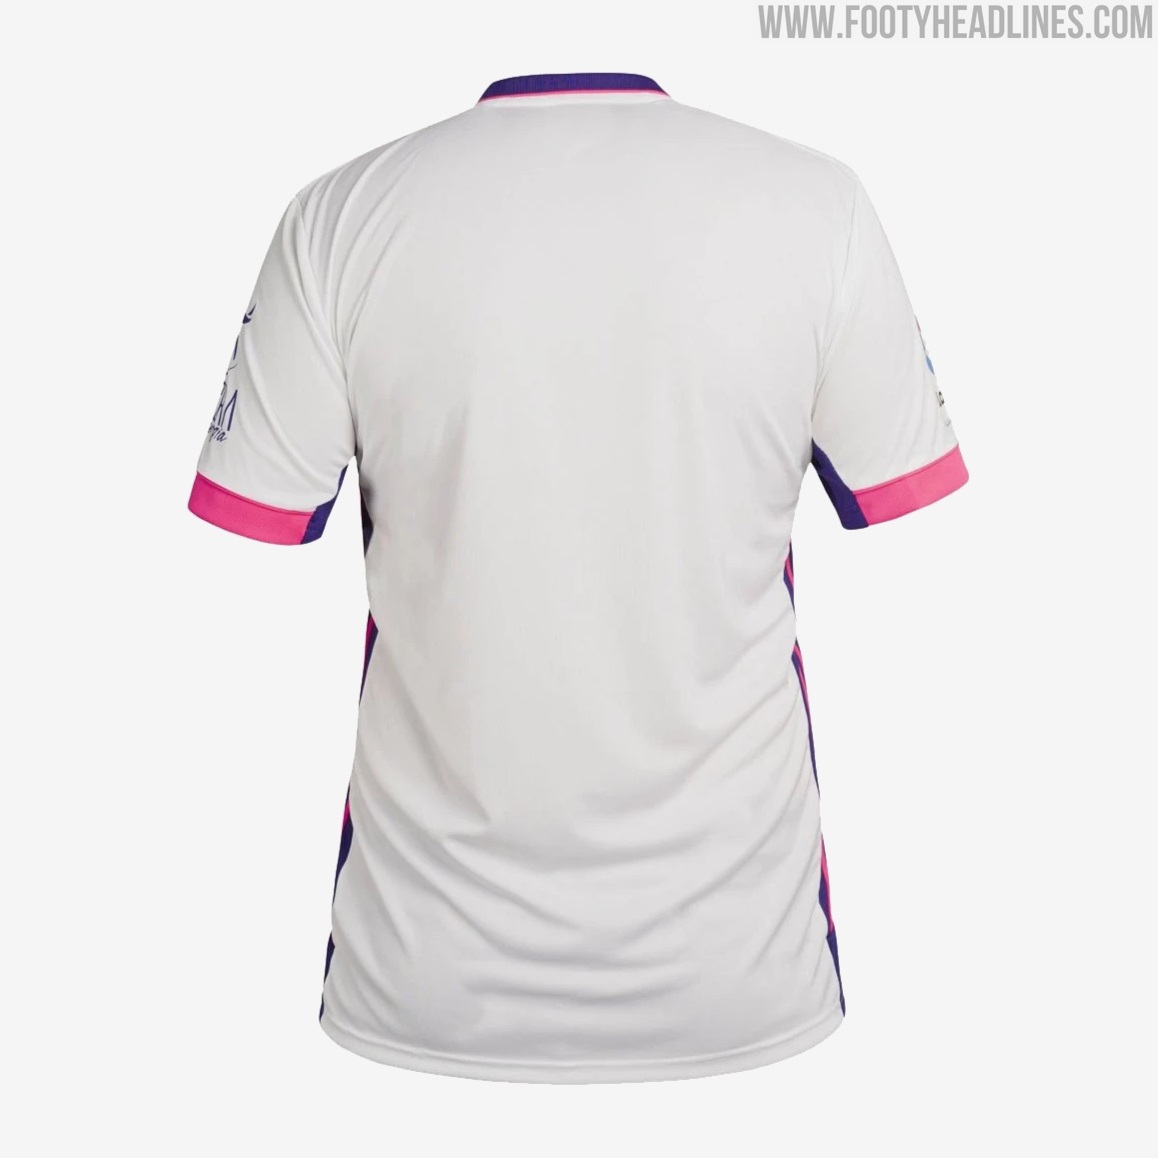 Real Valladolid 20-21 Home & Away Kits Released - Footy Headlines